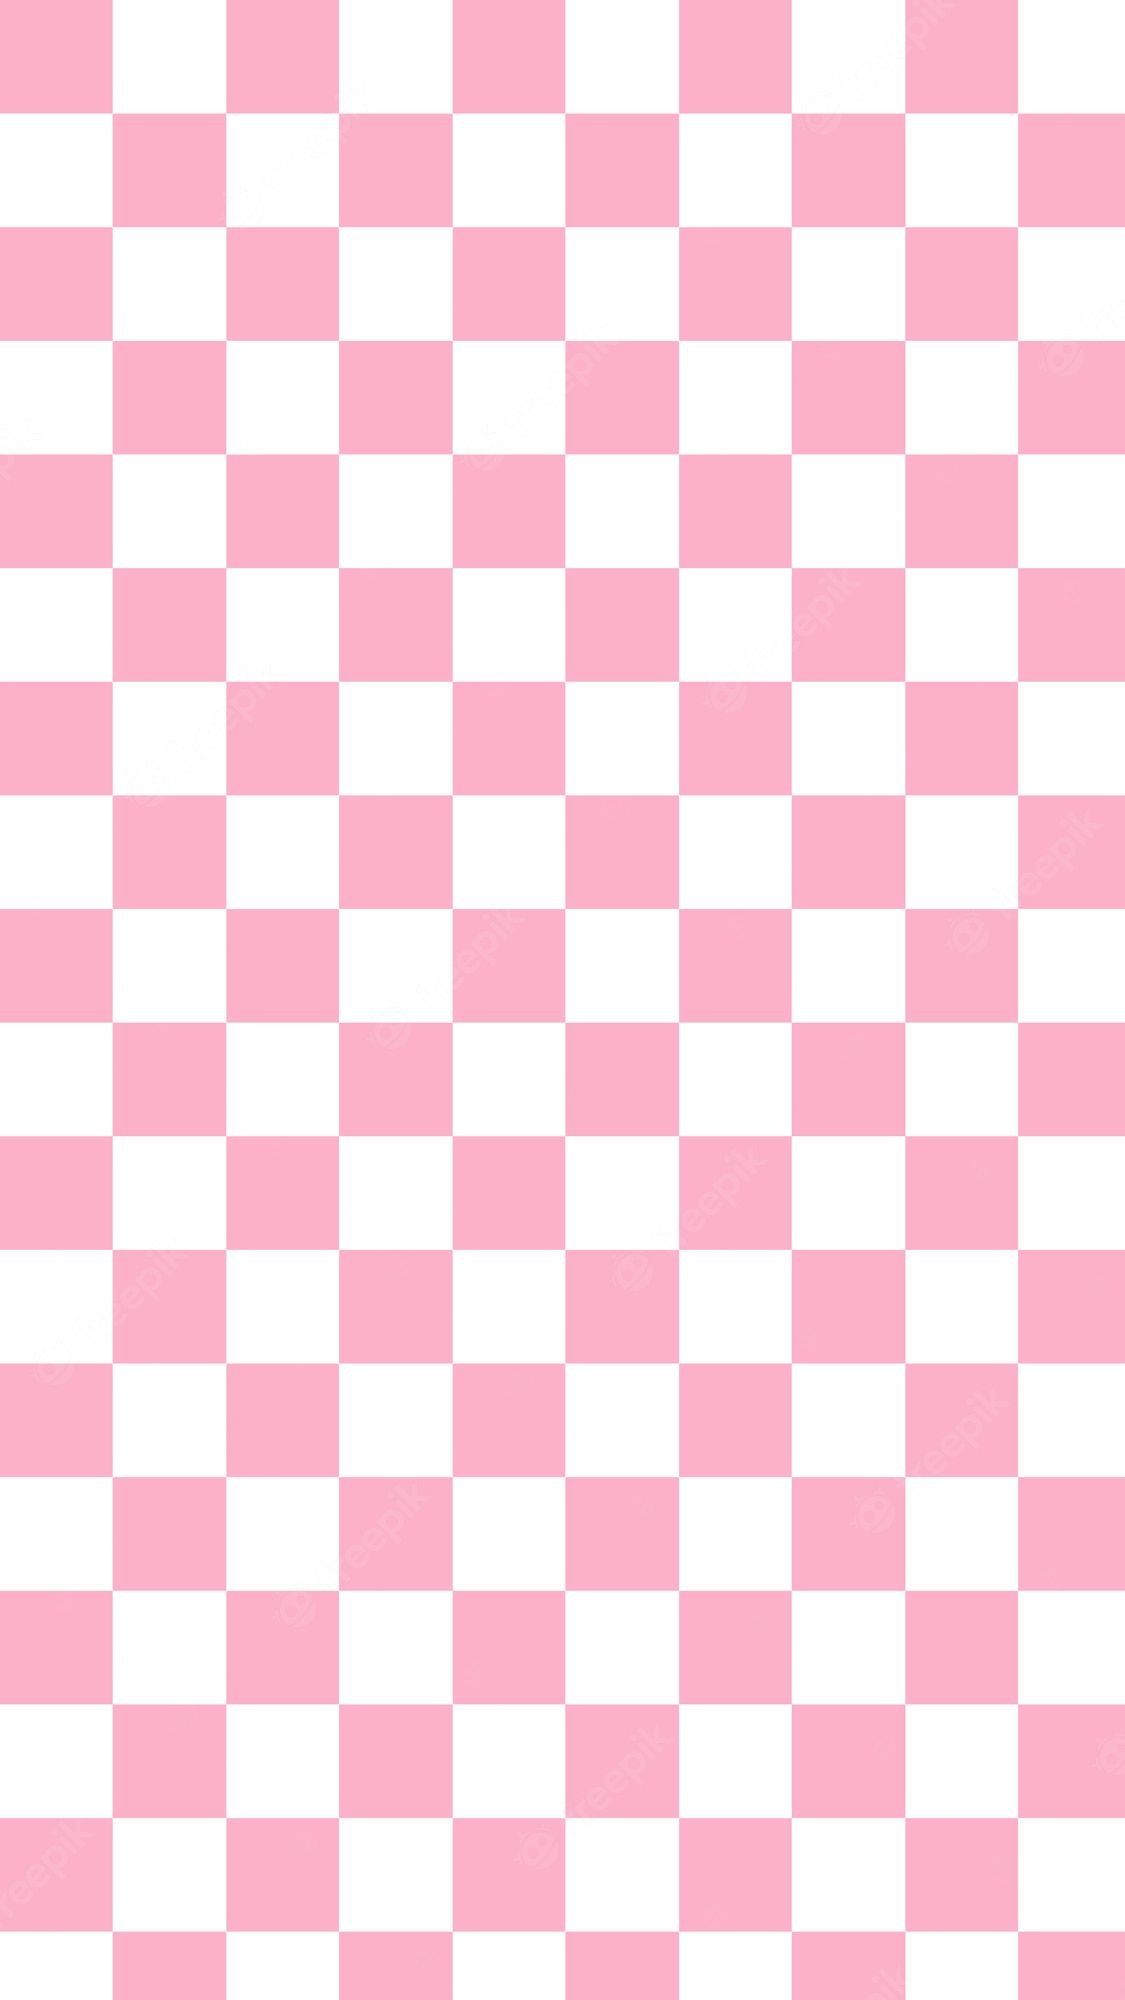 Premium Vector. Aesthetic cute vertical pastel pink and white checkerboard gingham plaid checkers wallpaper illustration perfect for backdrop wallpaper postcard banner cover background